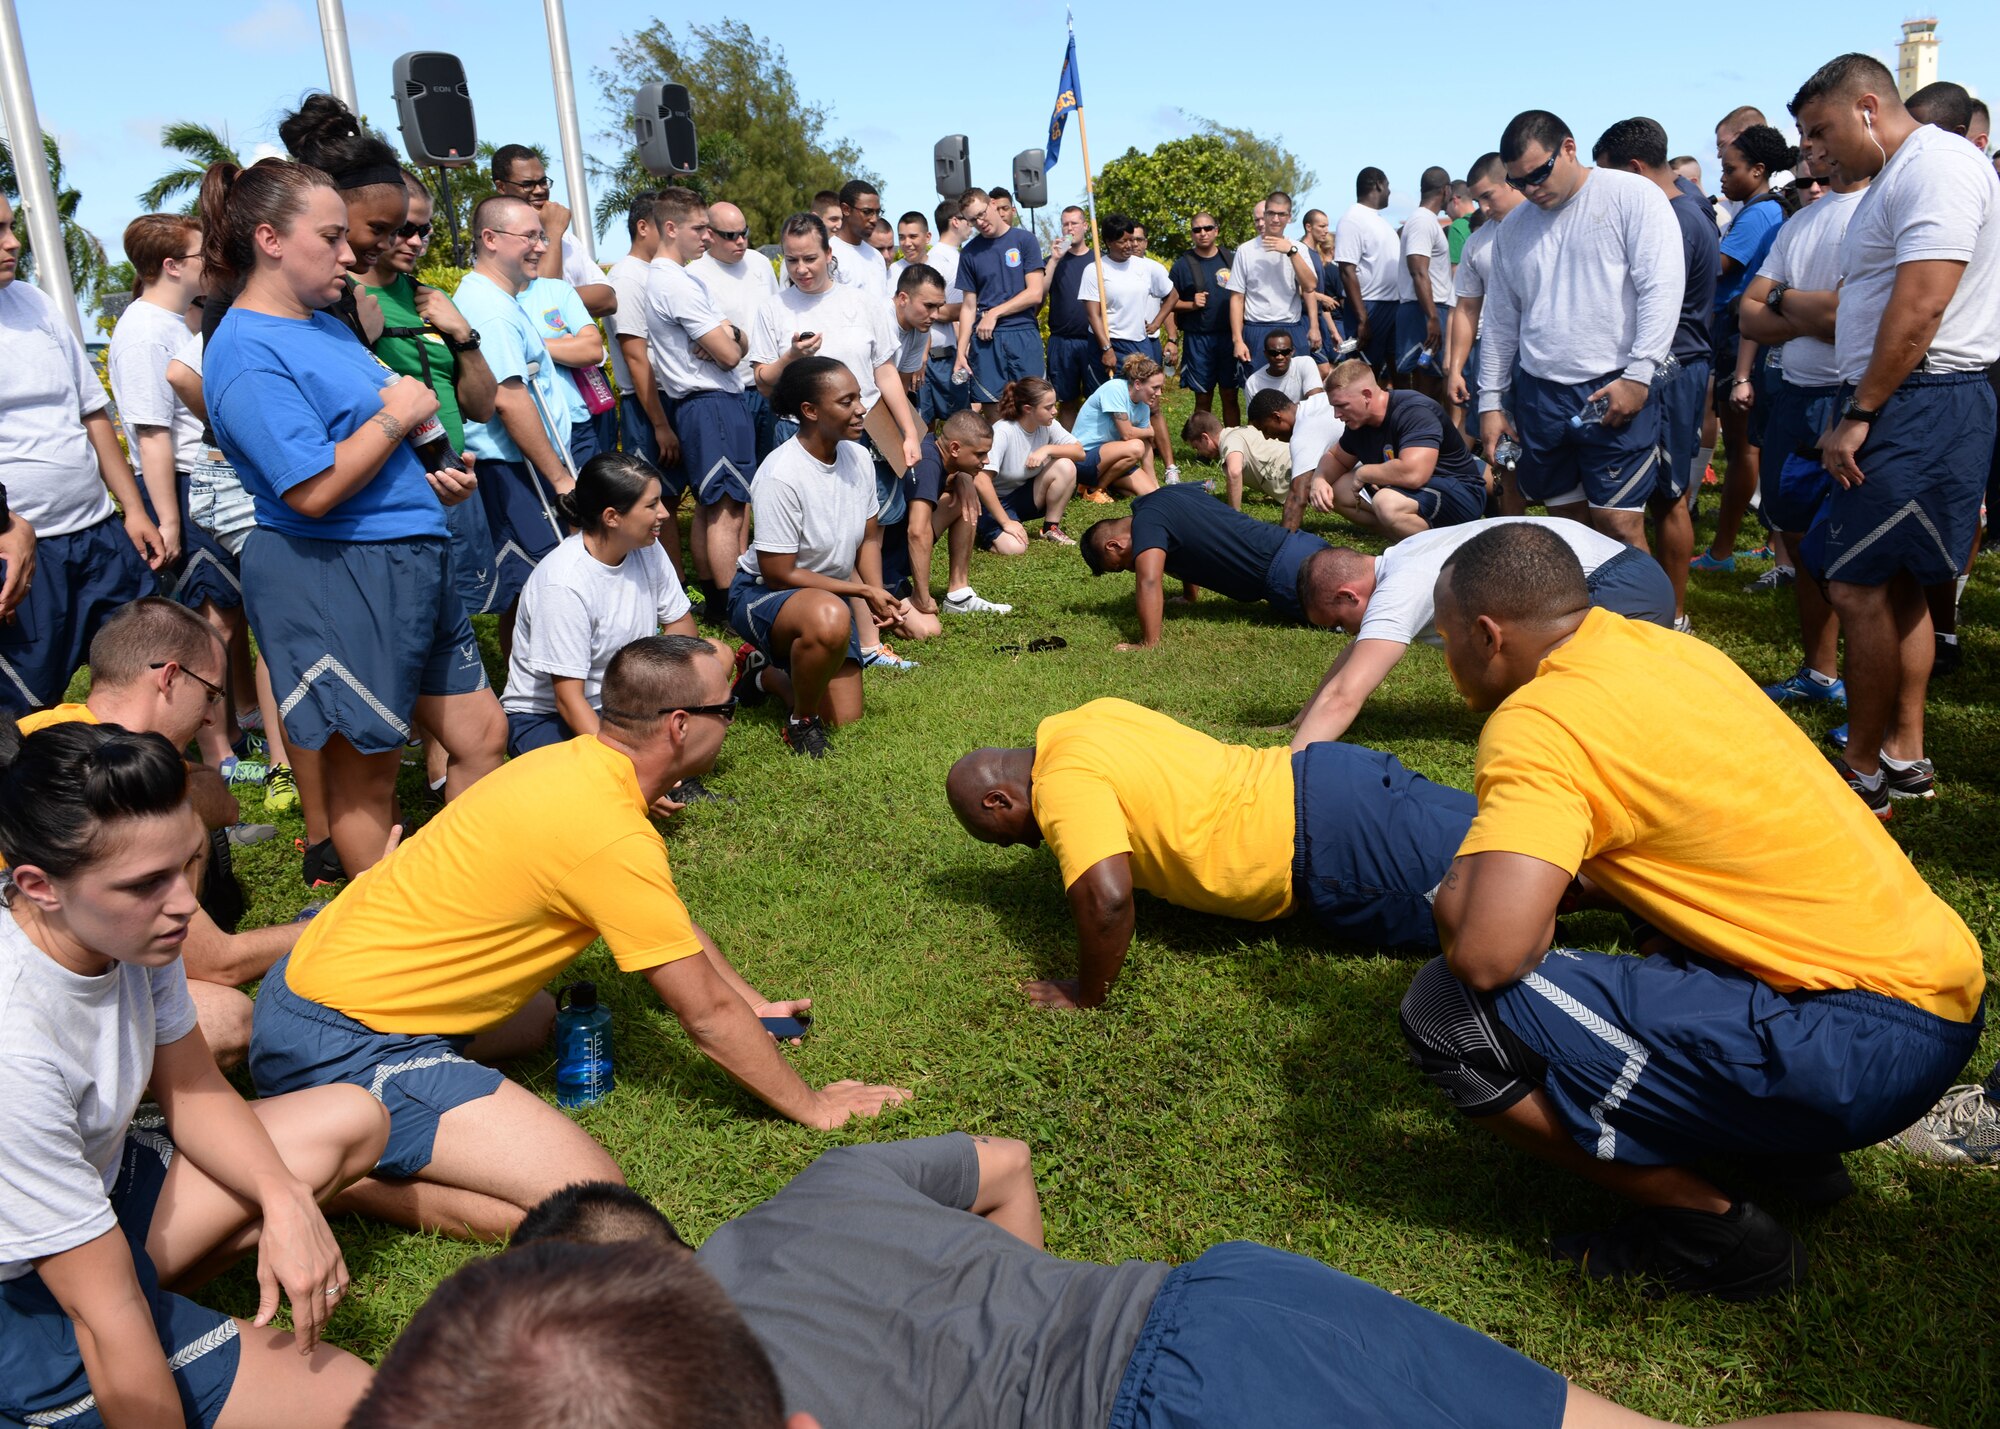 Members of Team Andersen participate in a push-up competition during Resiliency Day Nov. 21, 2014, on Andersen Air Force Base, Guam. Squadrons throughout the base participated in games and events as part of a base wide stand down to focus on resilience training and wingmanship. (U.S. Air Force photo by Senior Airman Cierra Presentado/Released)